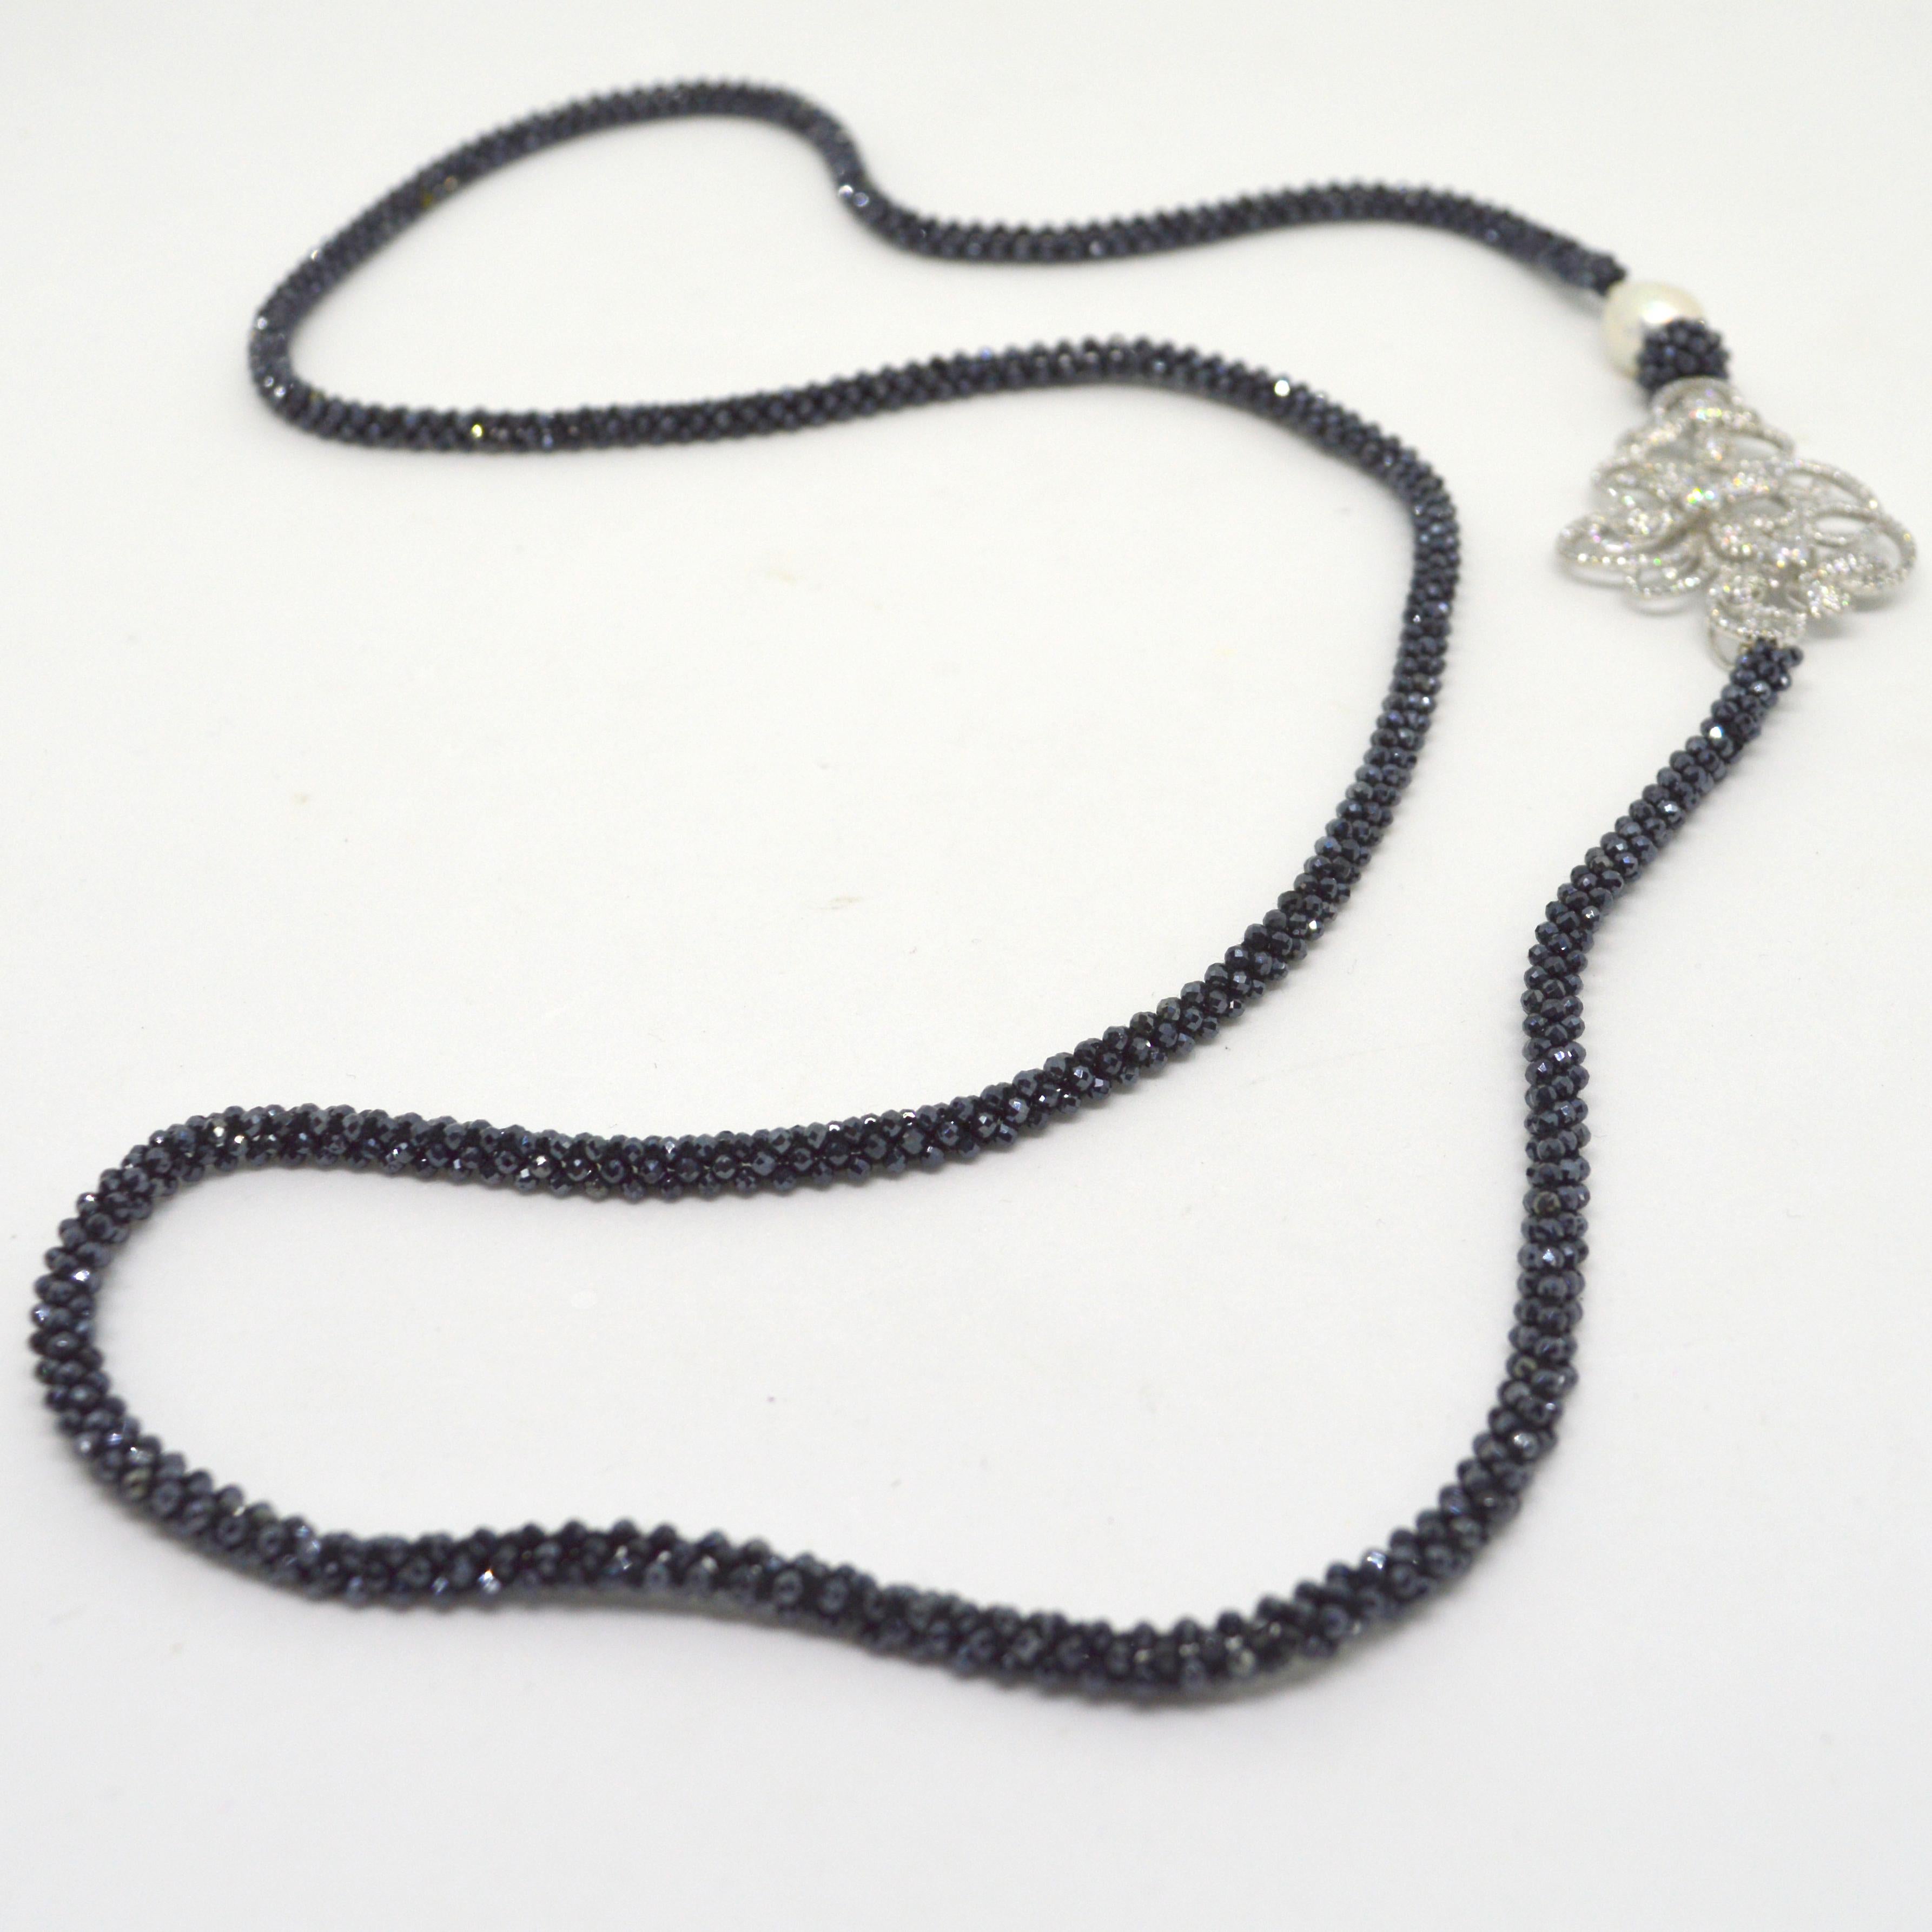 Stunning strand of woven 2mm micro faceted Black Spinel beads, Highlighted by a 16mm Baroque Fresh Water Pearl and a large Mirco Pave Cubic Rhodium plate connector. 
length 74cm  or 29inches